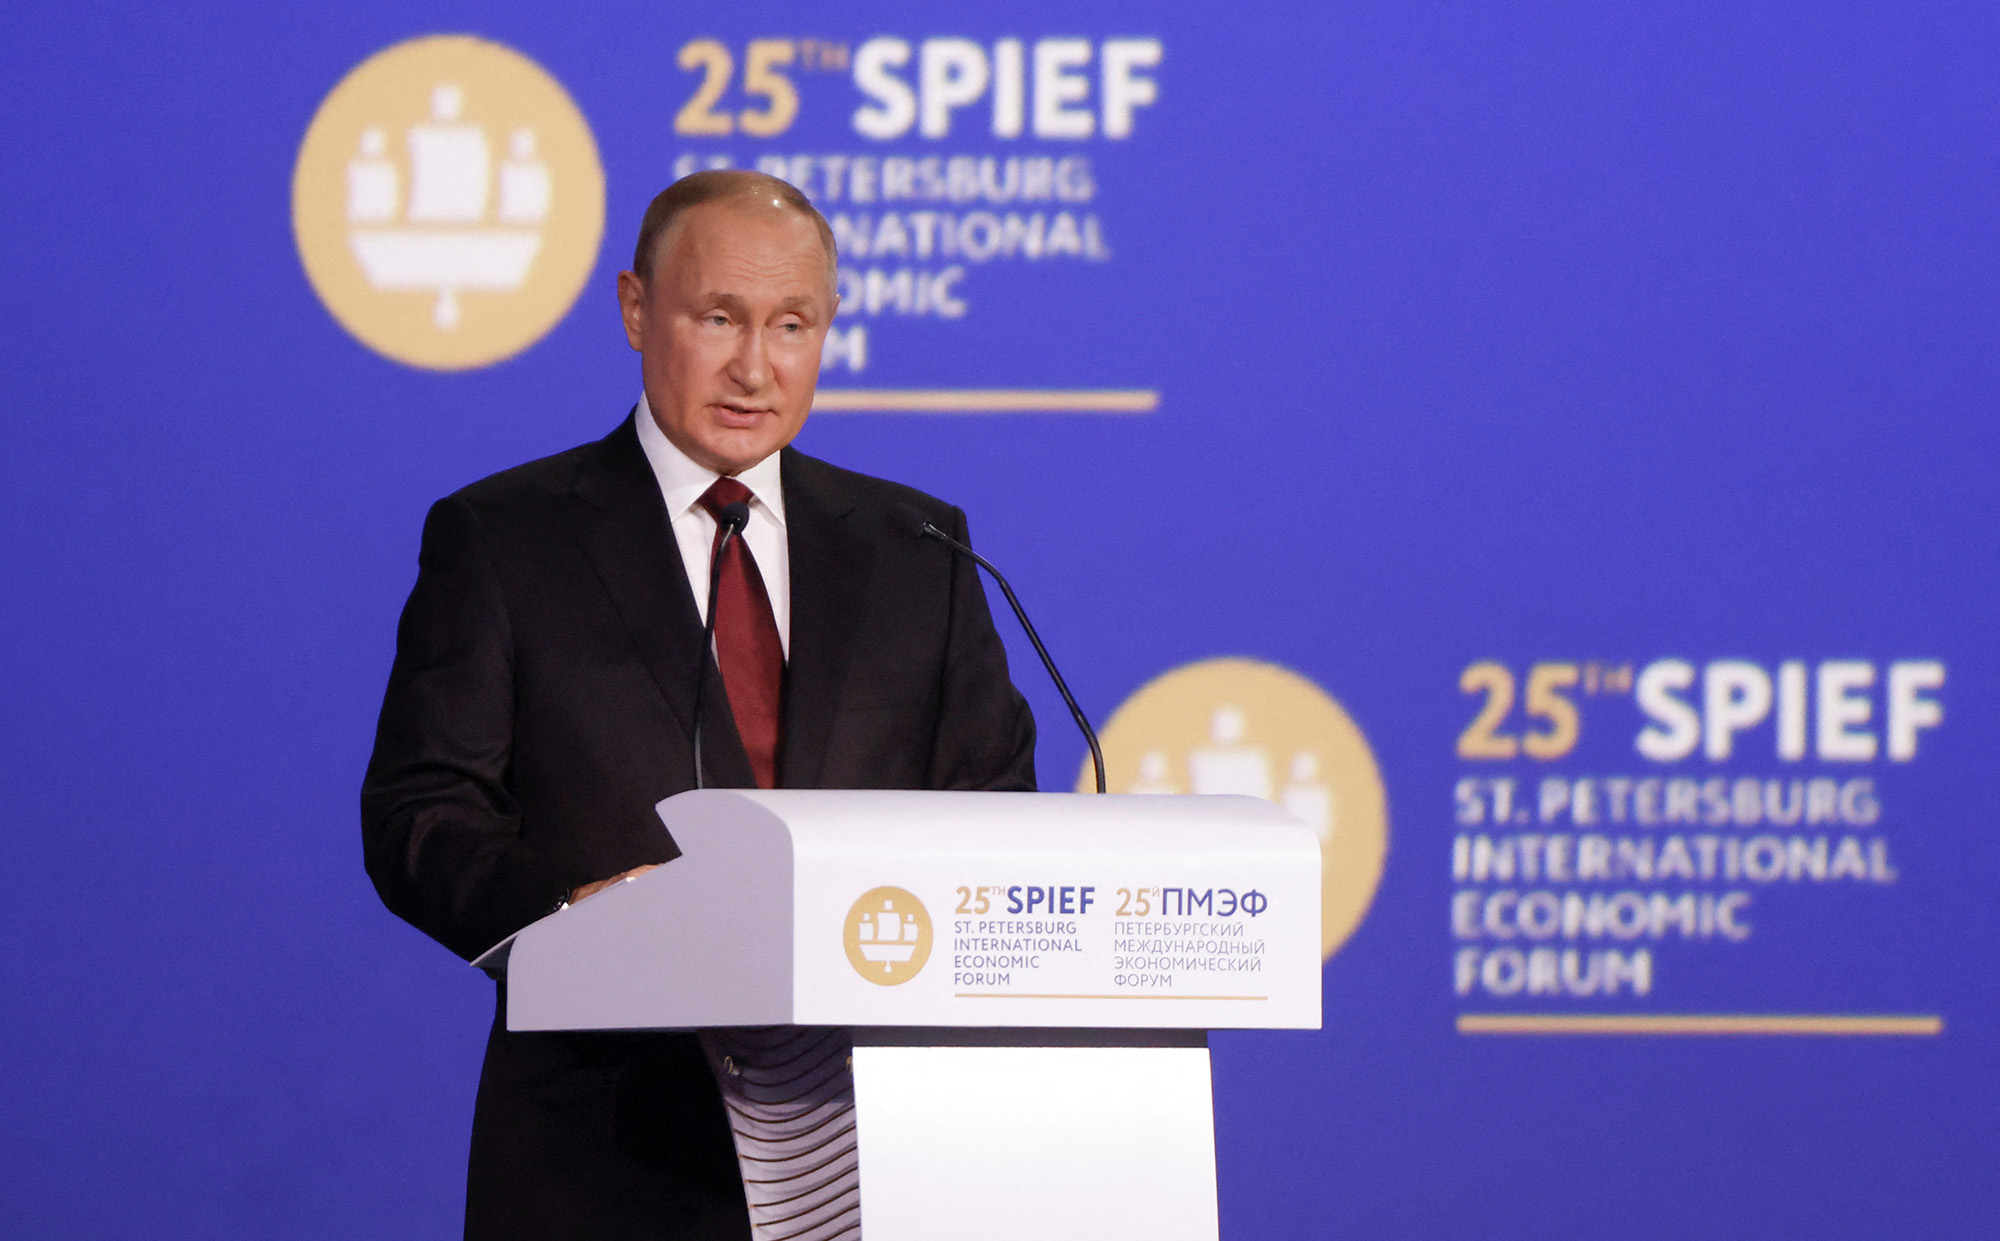 Russian President Vladimir Putin delivers a speech during a session of the St. Petersburg International Economic Forum (SPIEF) in Saint Petersburg, Russia, on June 17.